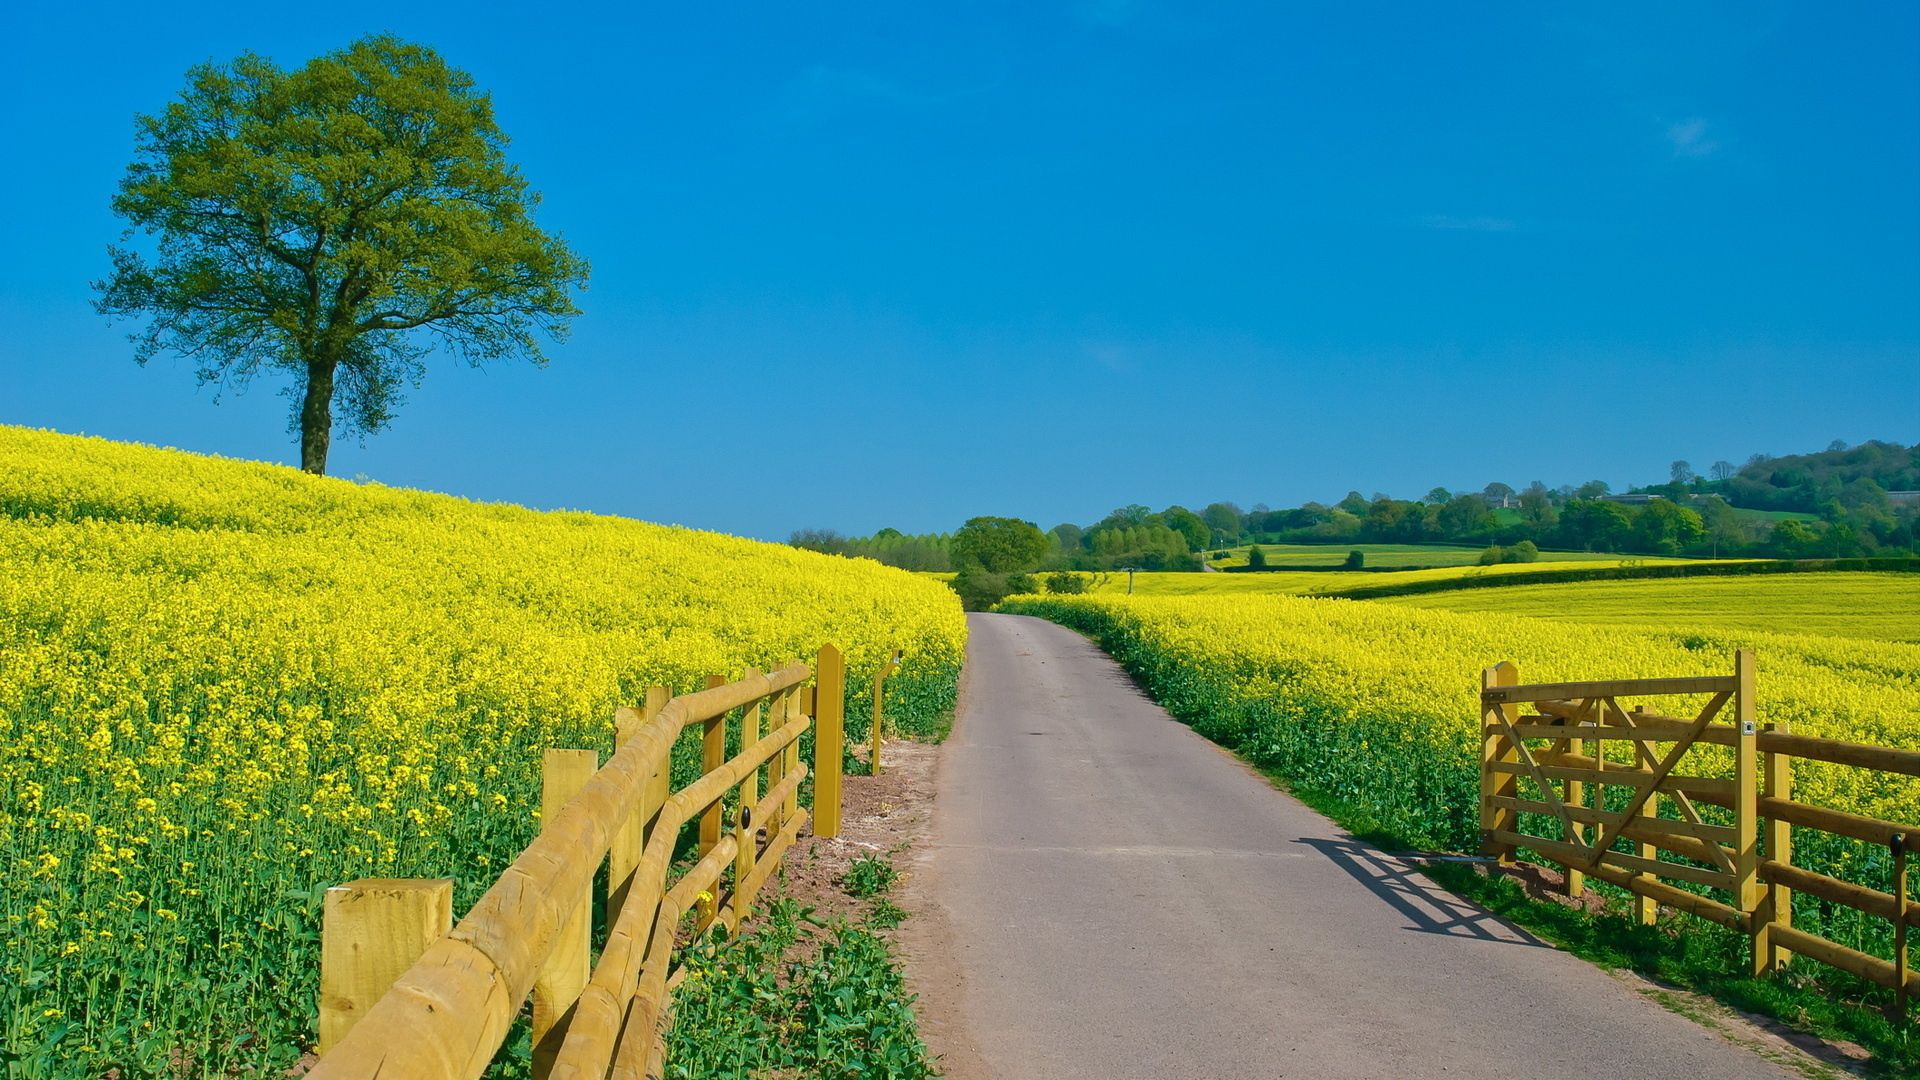 road, summer, open spaces, nature, flowers, expanse, slopes, yellow, fencing, enclosure, day